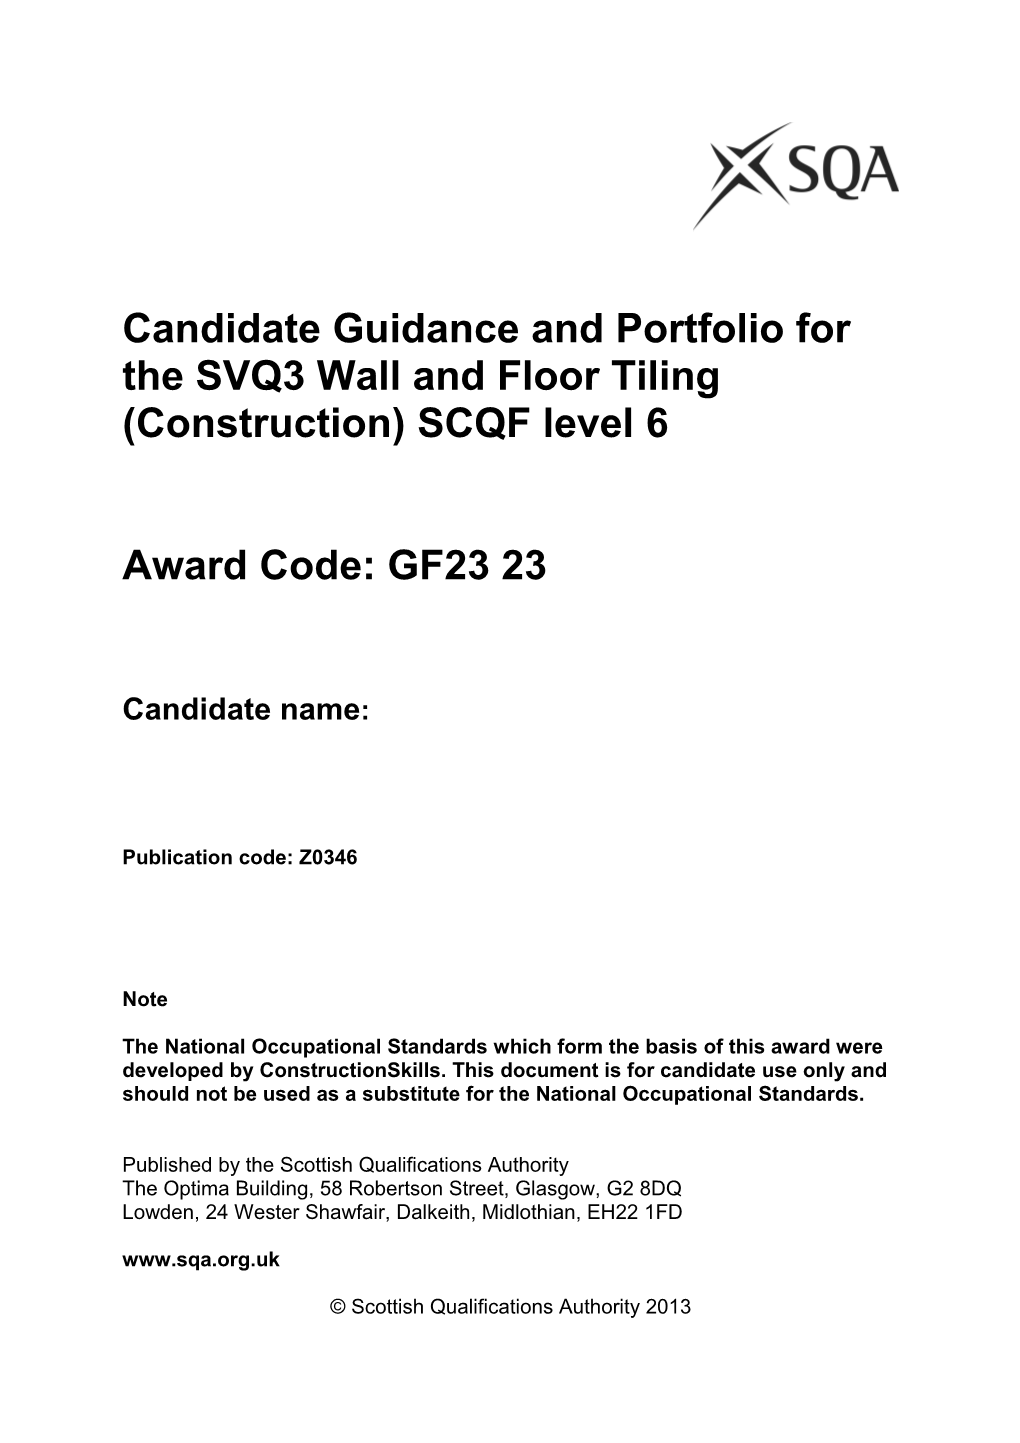 Candidate Guidance and Portfolio for the SVQ3 Wall and Floor Tiling (Construction) SCQF